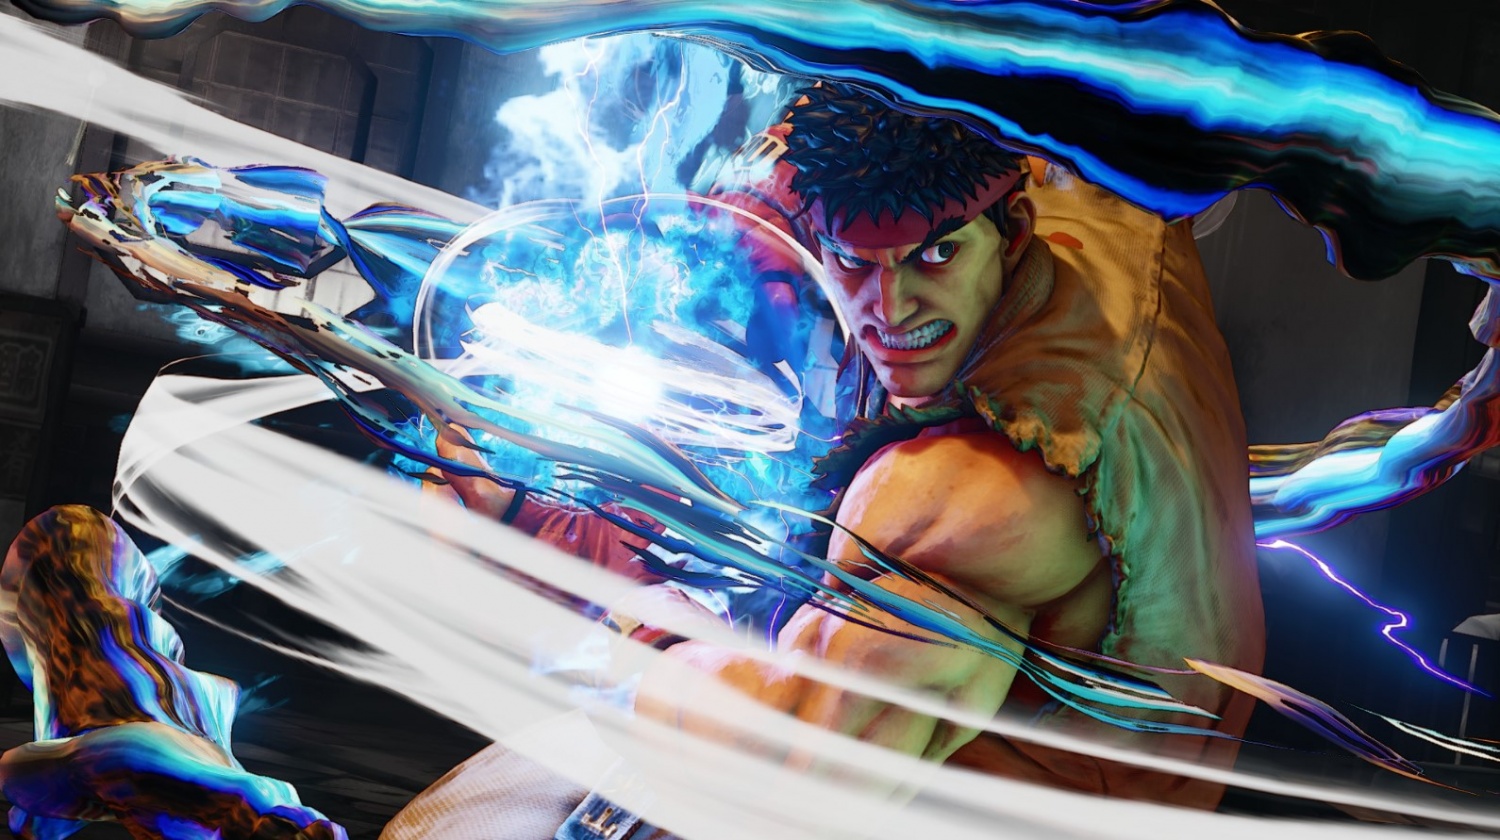 Street Fighter V: Champion Edition DLC character Luke launches